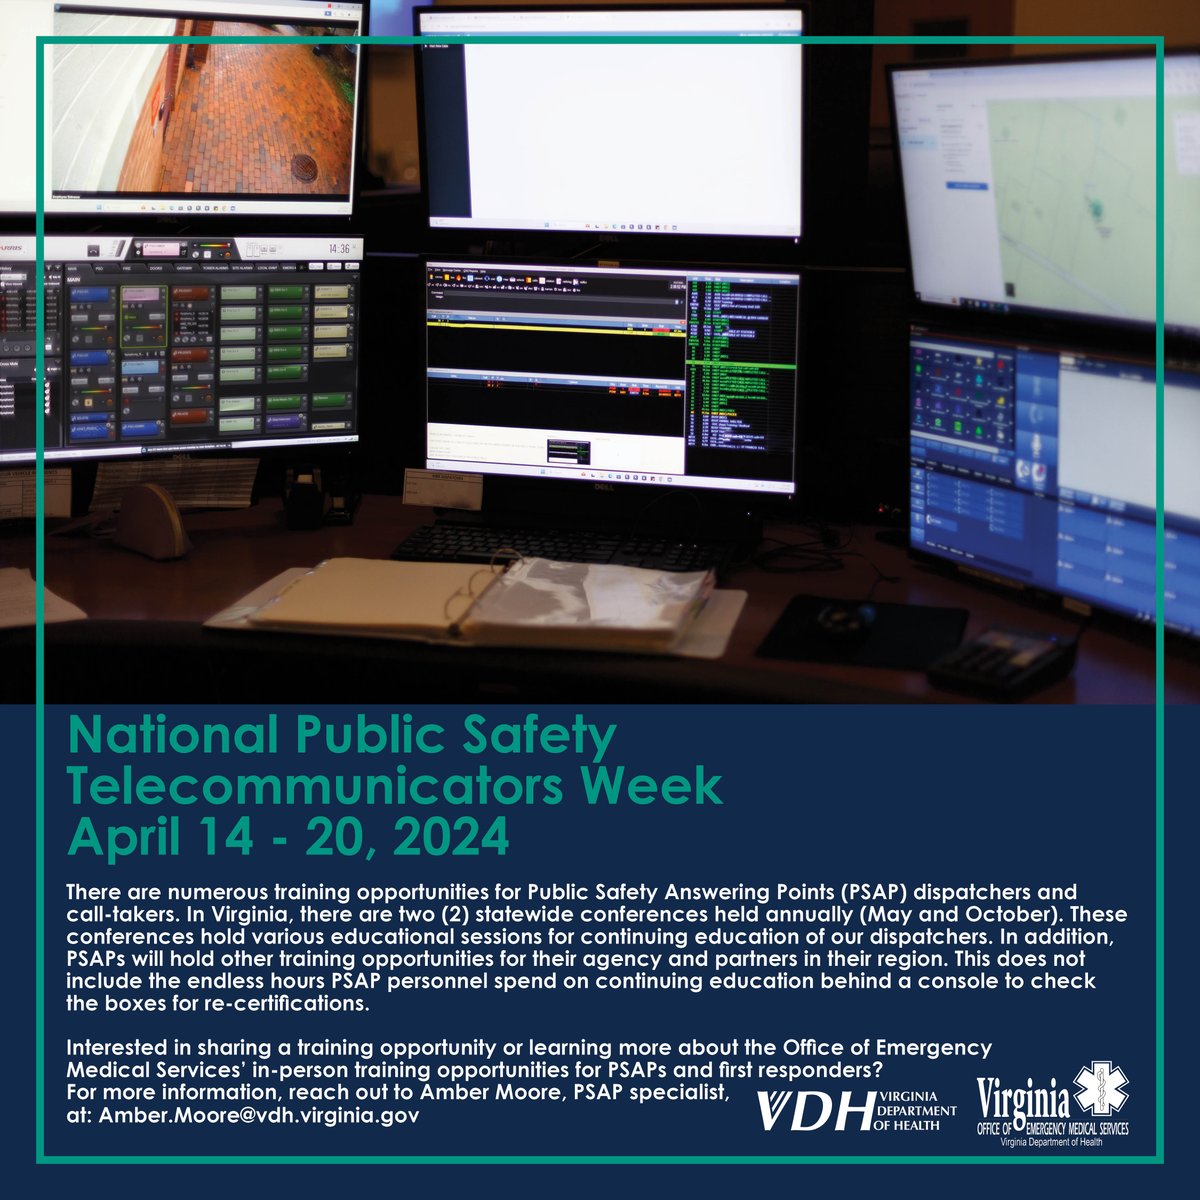 Happy National Public Safety Telecommunicators Week! Training for the PSAP dispatchers and call-takers does not stop after their initial academy, precepting, certifying or on-boarding. Training is on-going between dispatching skills and call-taking skills. #NPSTW